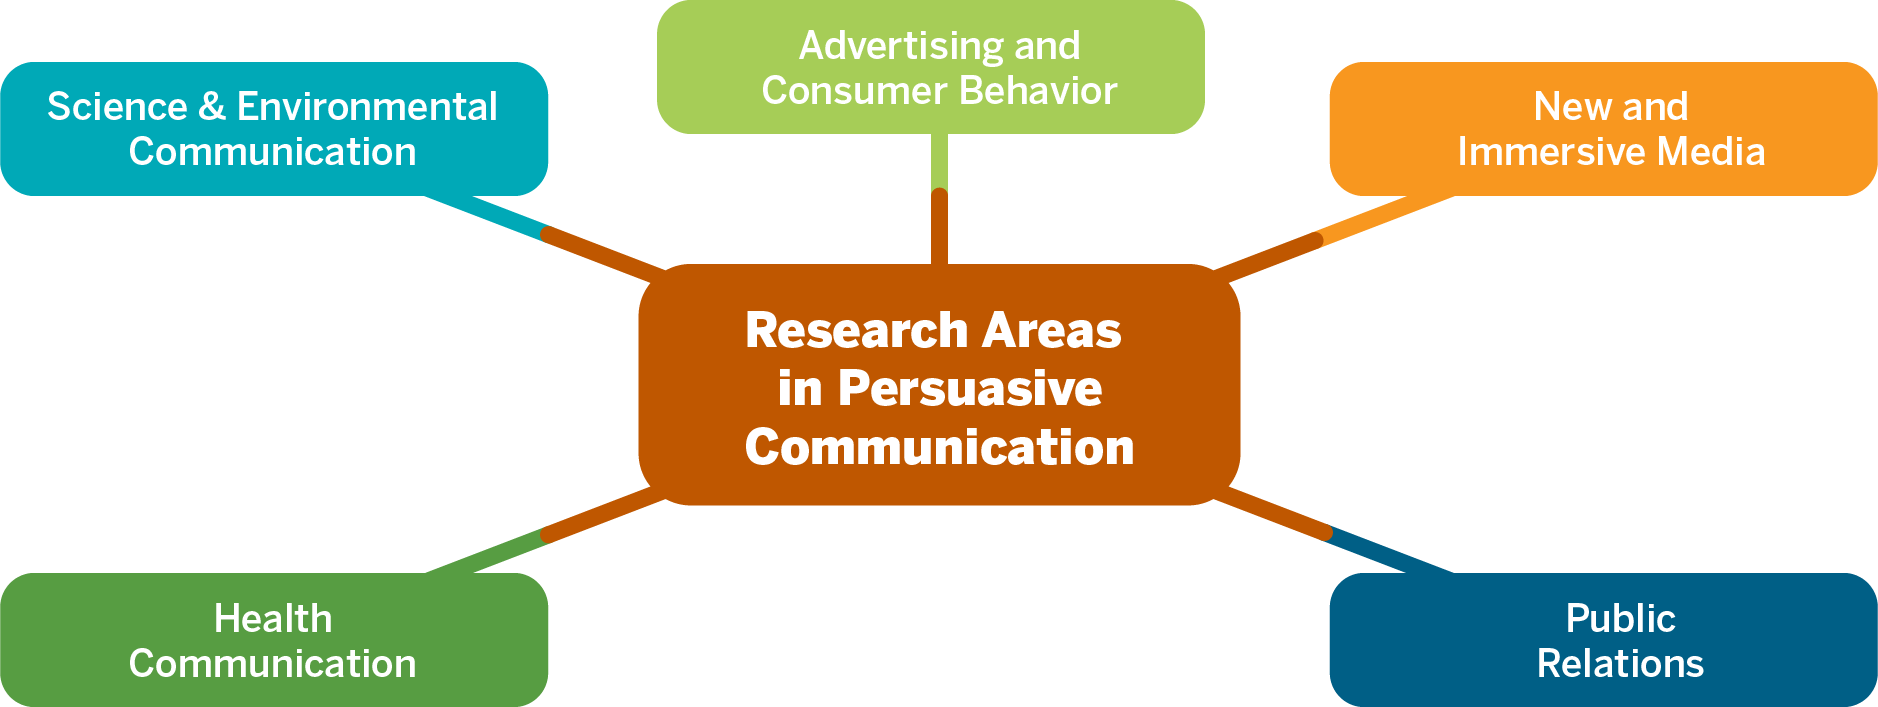 map of advertising research areas including strategy, public relations, and health communication